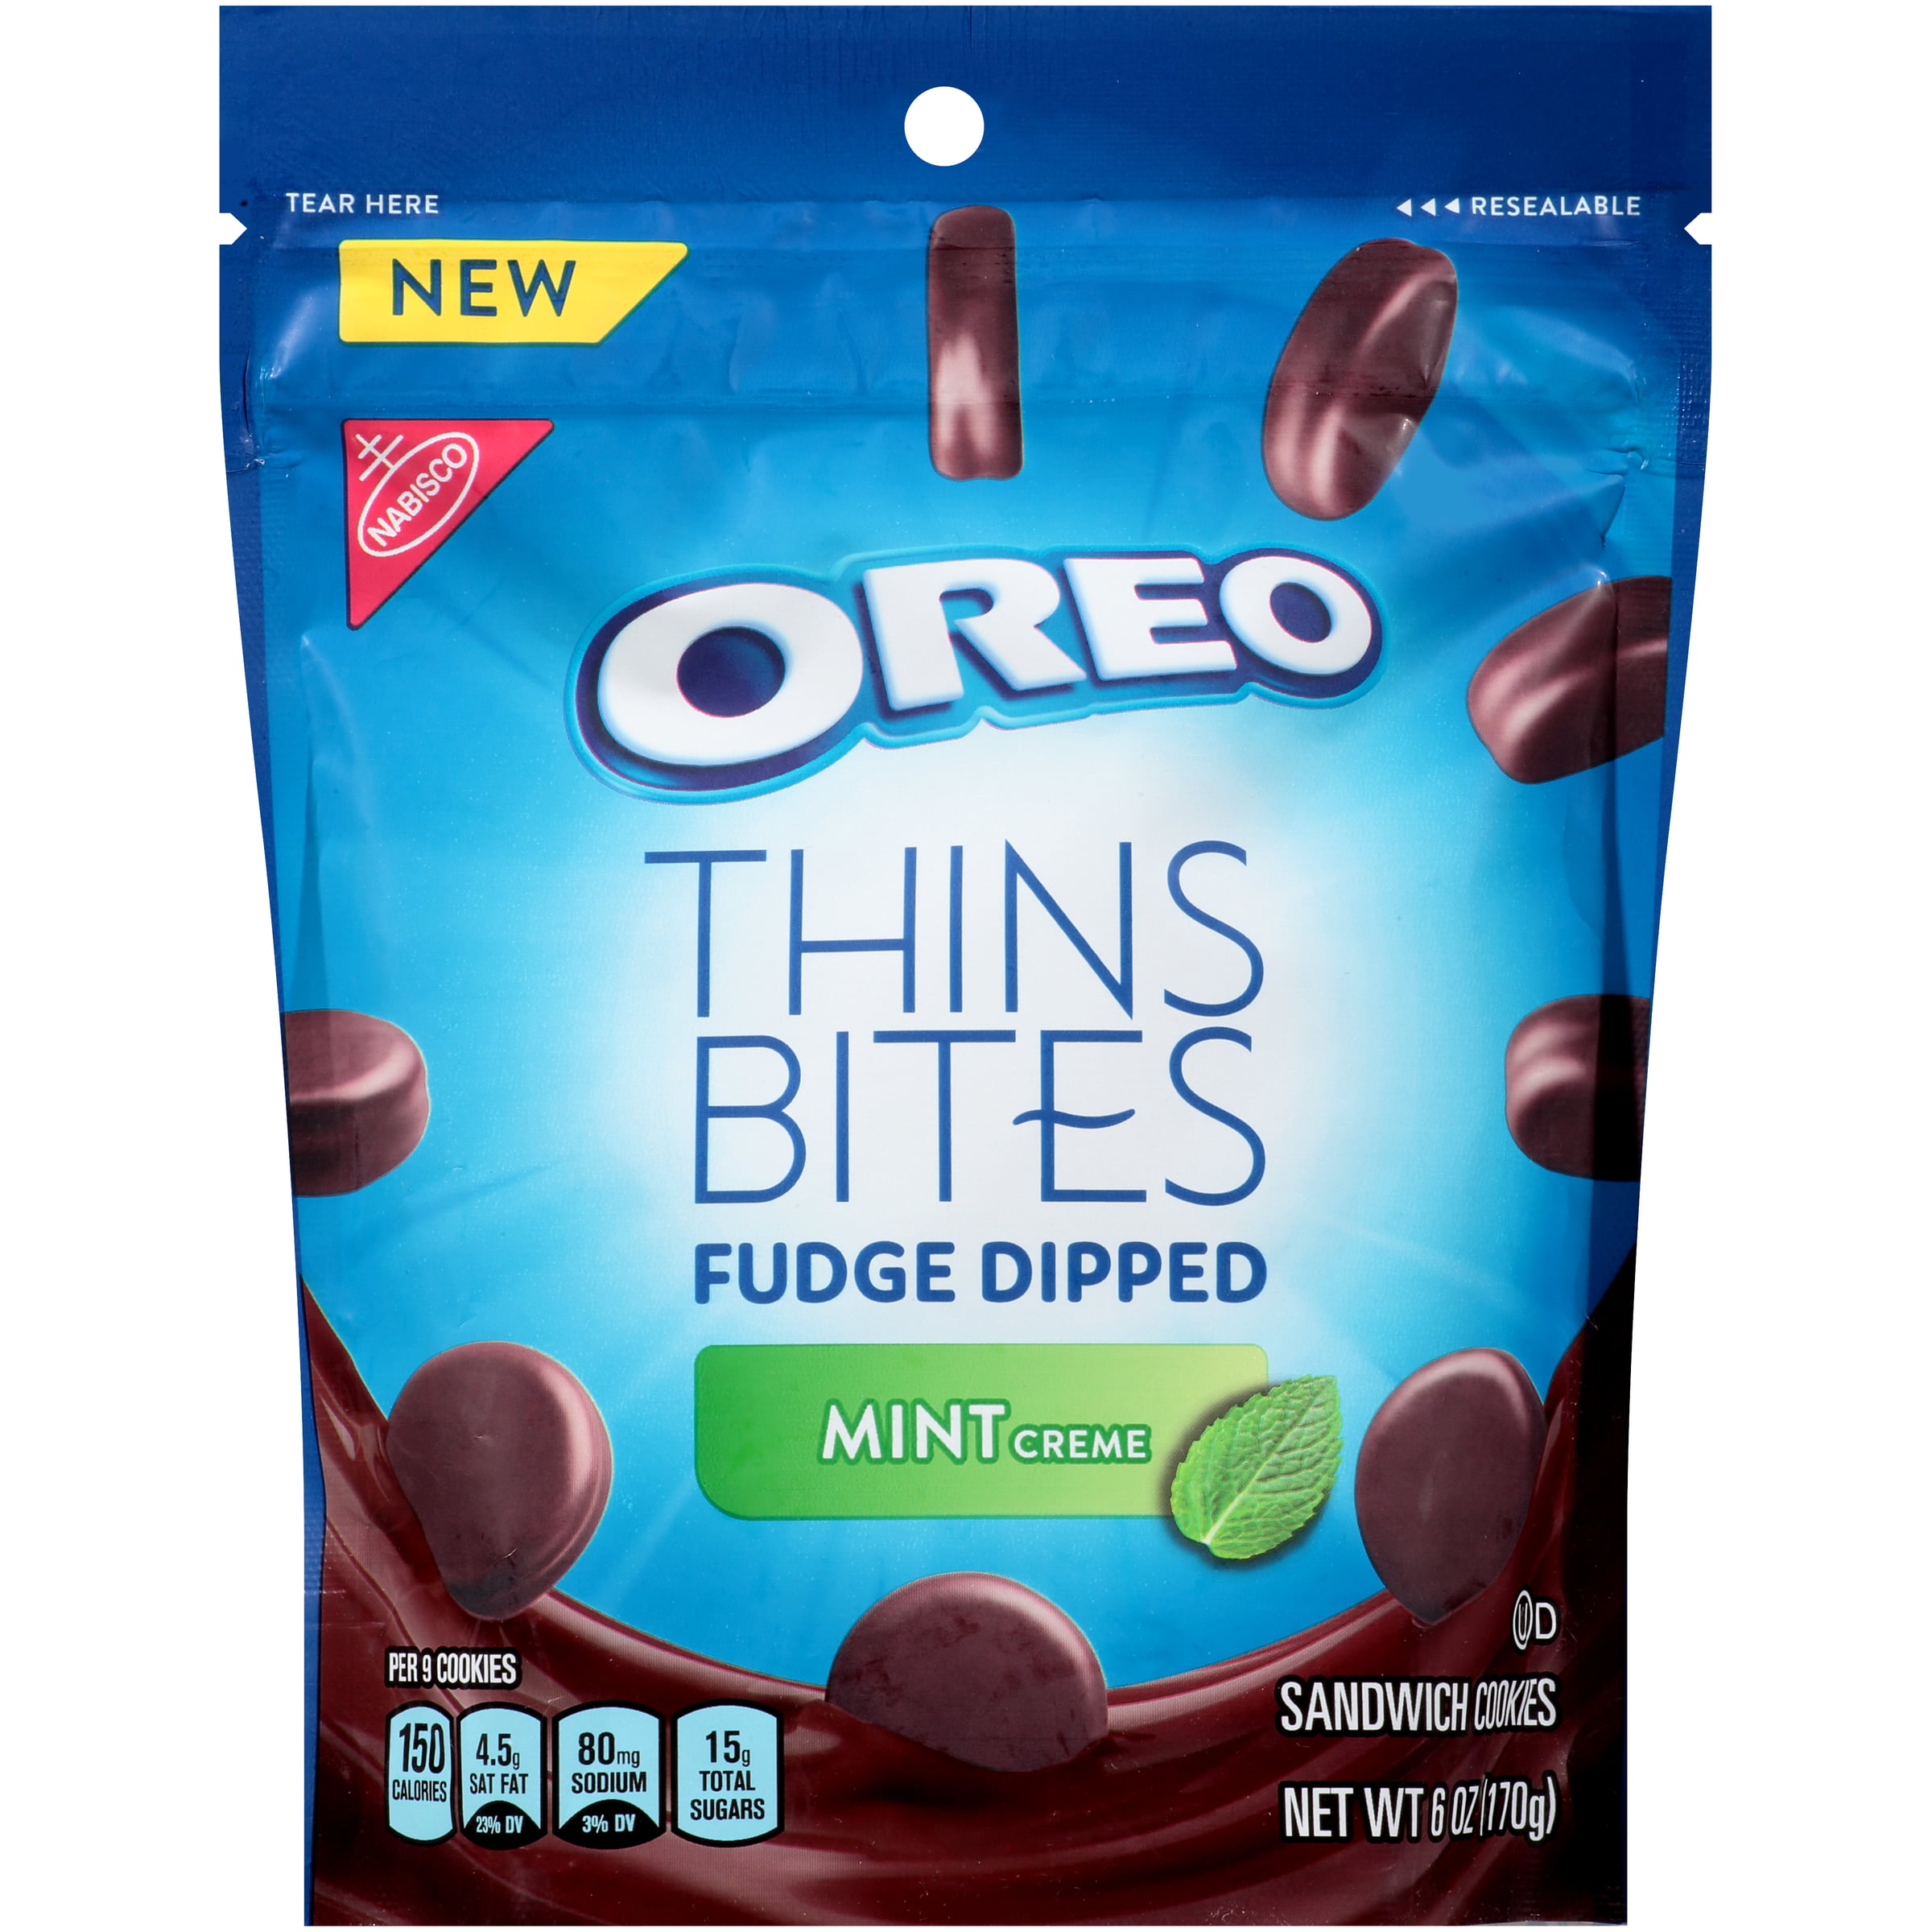 OREO Thins Bites Fudge Dipped Chocolate Sandwich Cookies, Mint Flavored Creme, 1 Resealable 6 oz ...